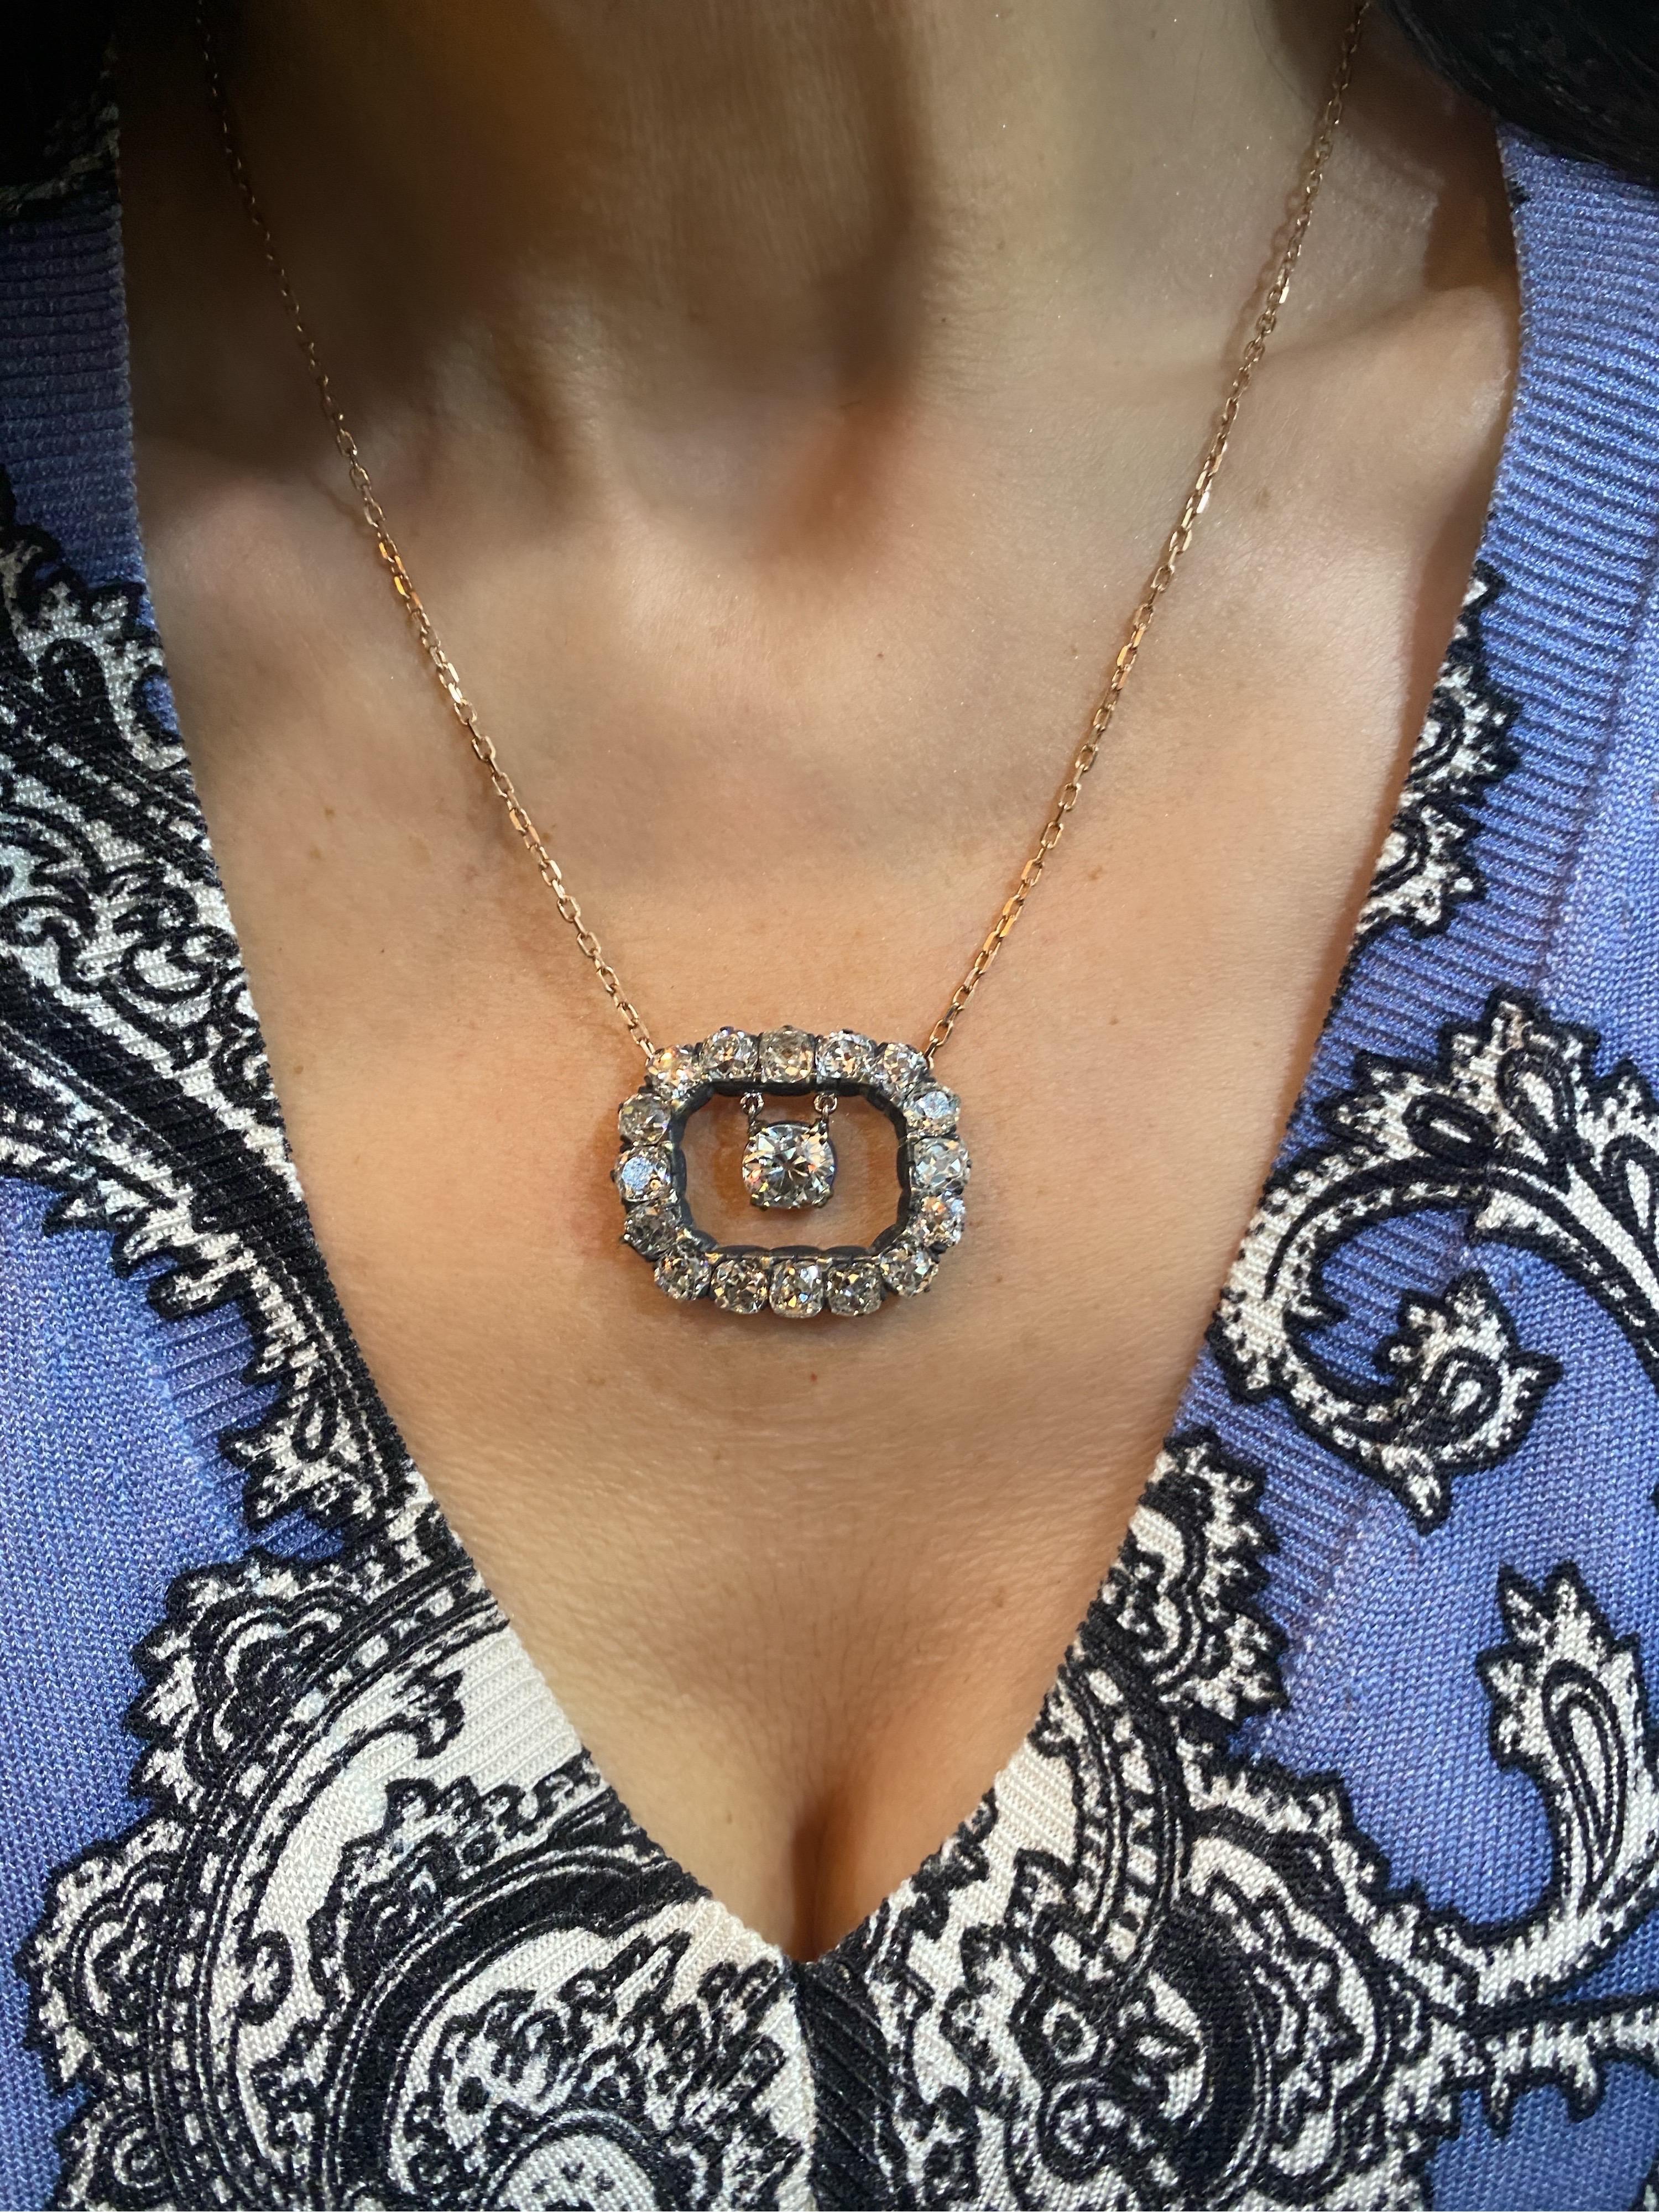 One- of-a-kind is our specialty! This incredible cushion cut necklace features a center 1.74 Carat GIA Certified Old mine Brilliant that dangles in center and an additional 10 Carat surrounding old cushion cut diamonds. Diamonds are set in blackened